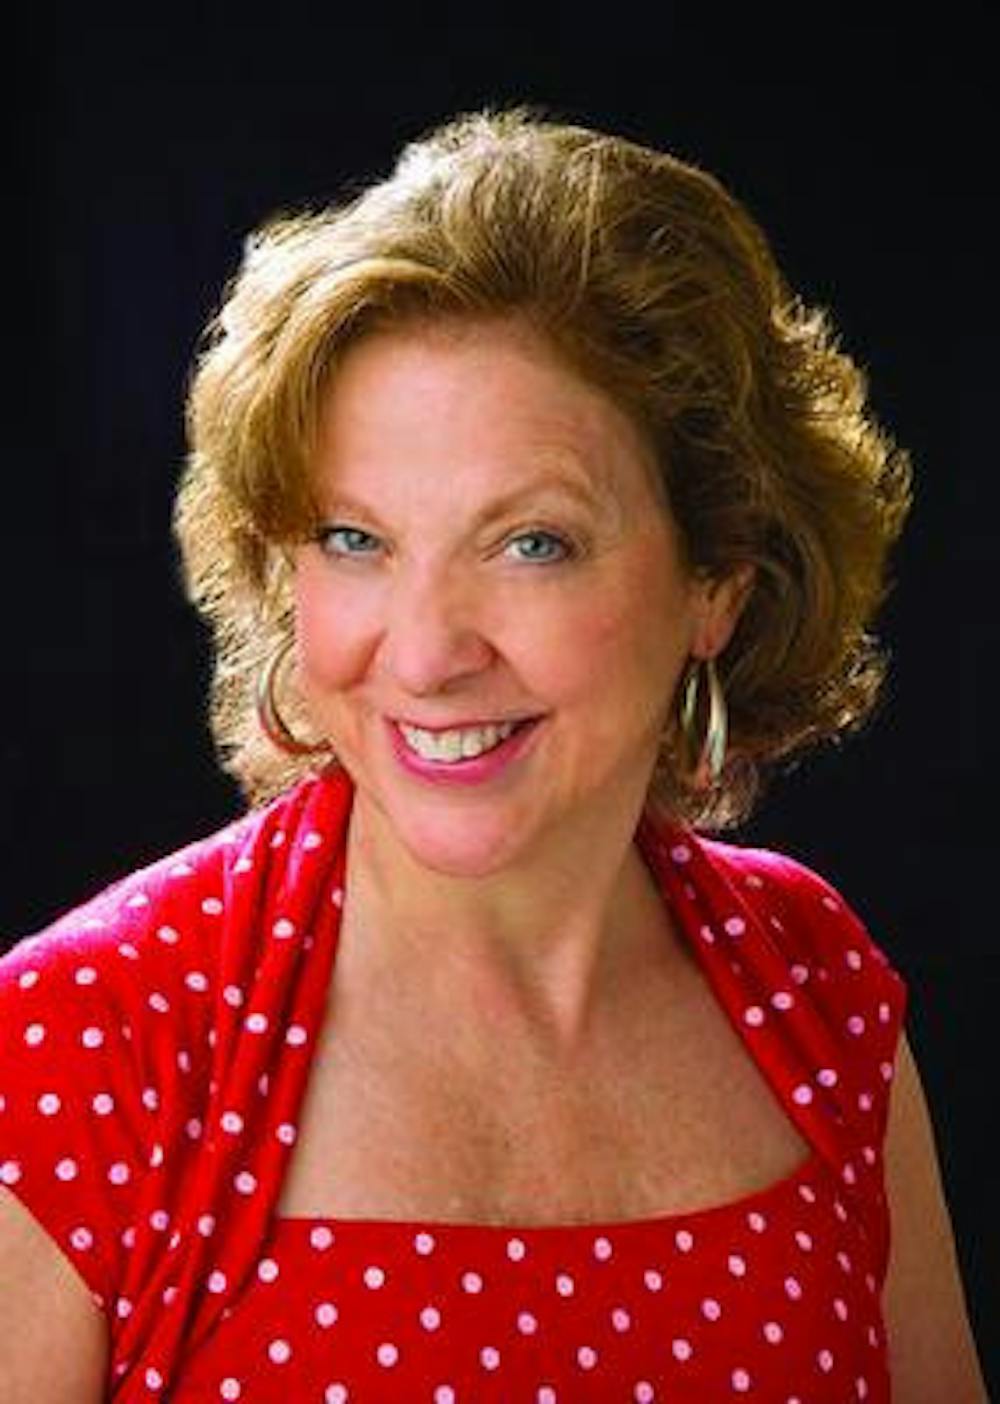 Mercer University vocal studies chair and director of opera, Martha Malone, is bringing Spring Fever to Macon, Georgia on March 1.